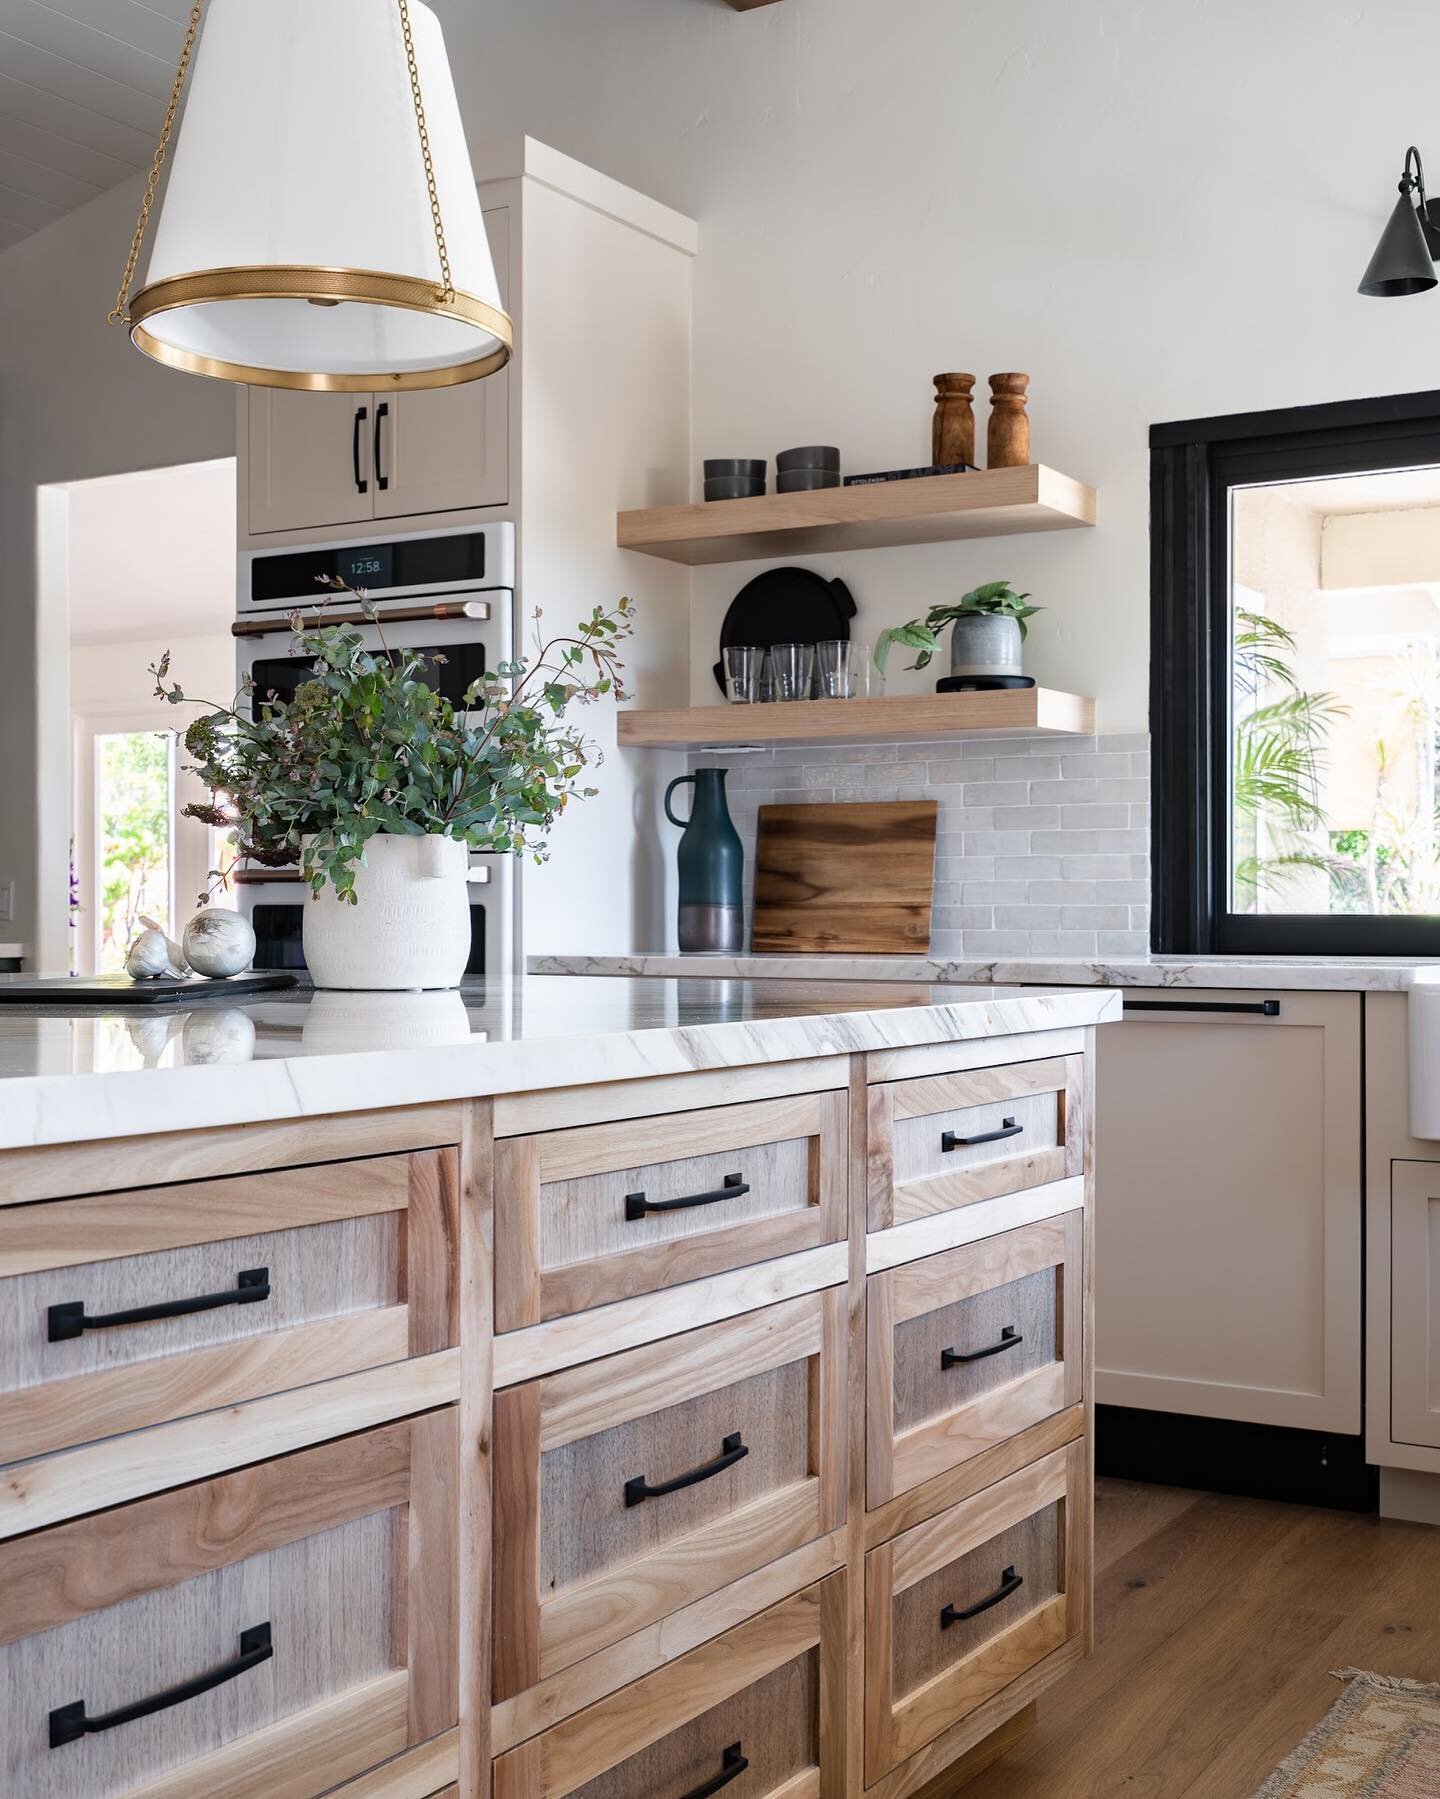 Custom island cabinets bring warmth to this kitchen. The natural variances of the wood are showing off and add a touch of charm and comfort to the workspace. 

Designer: @willowbybridget 
📷: @sandiegointeriorphotography